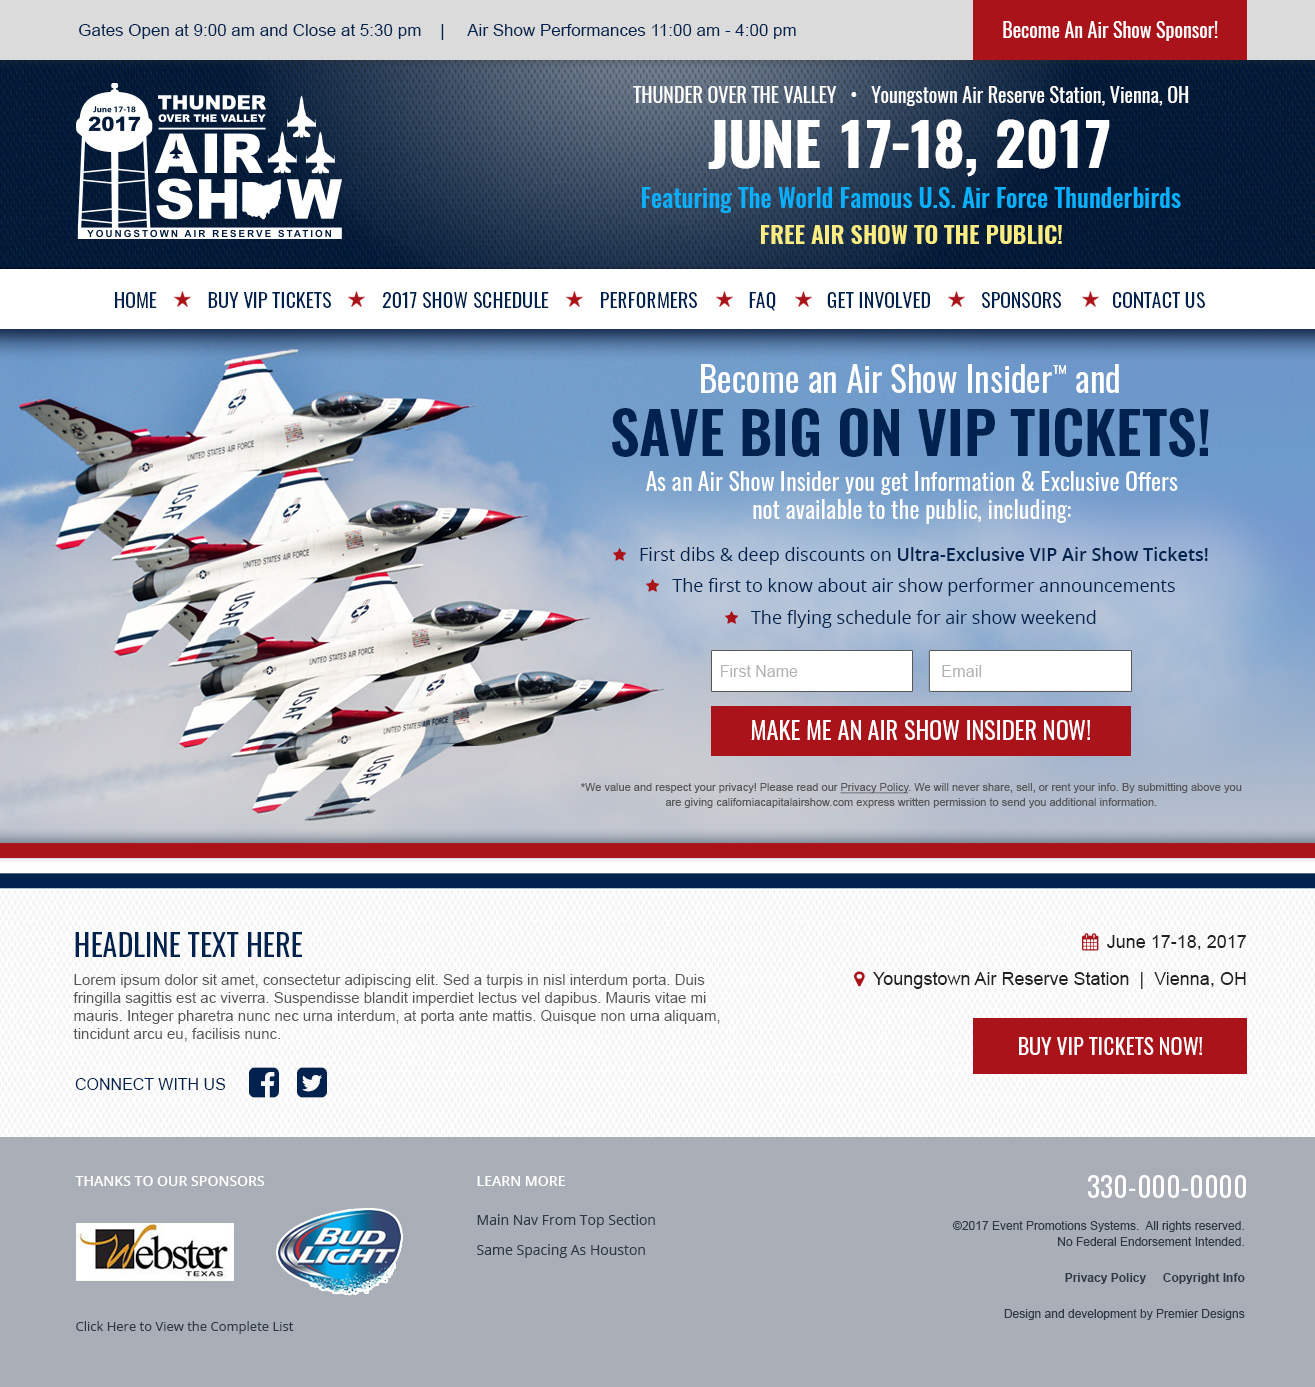 Youngstown Airshow website design